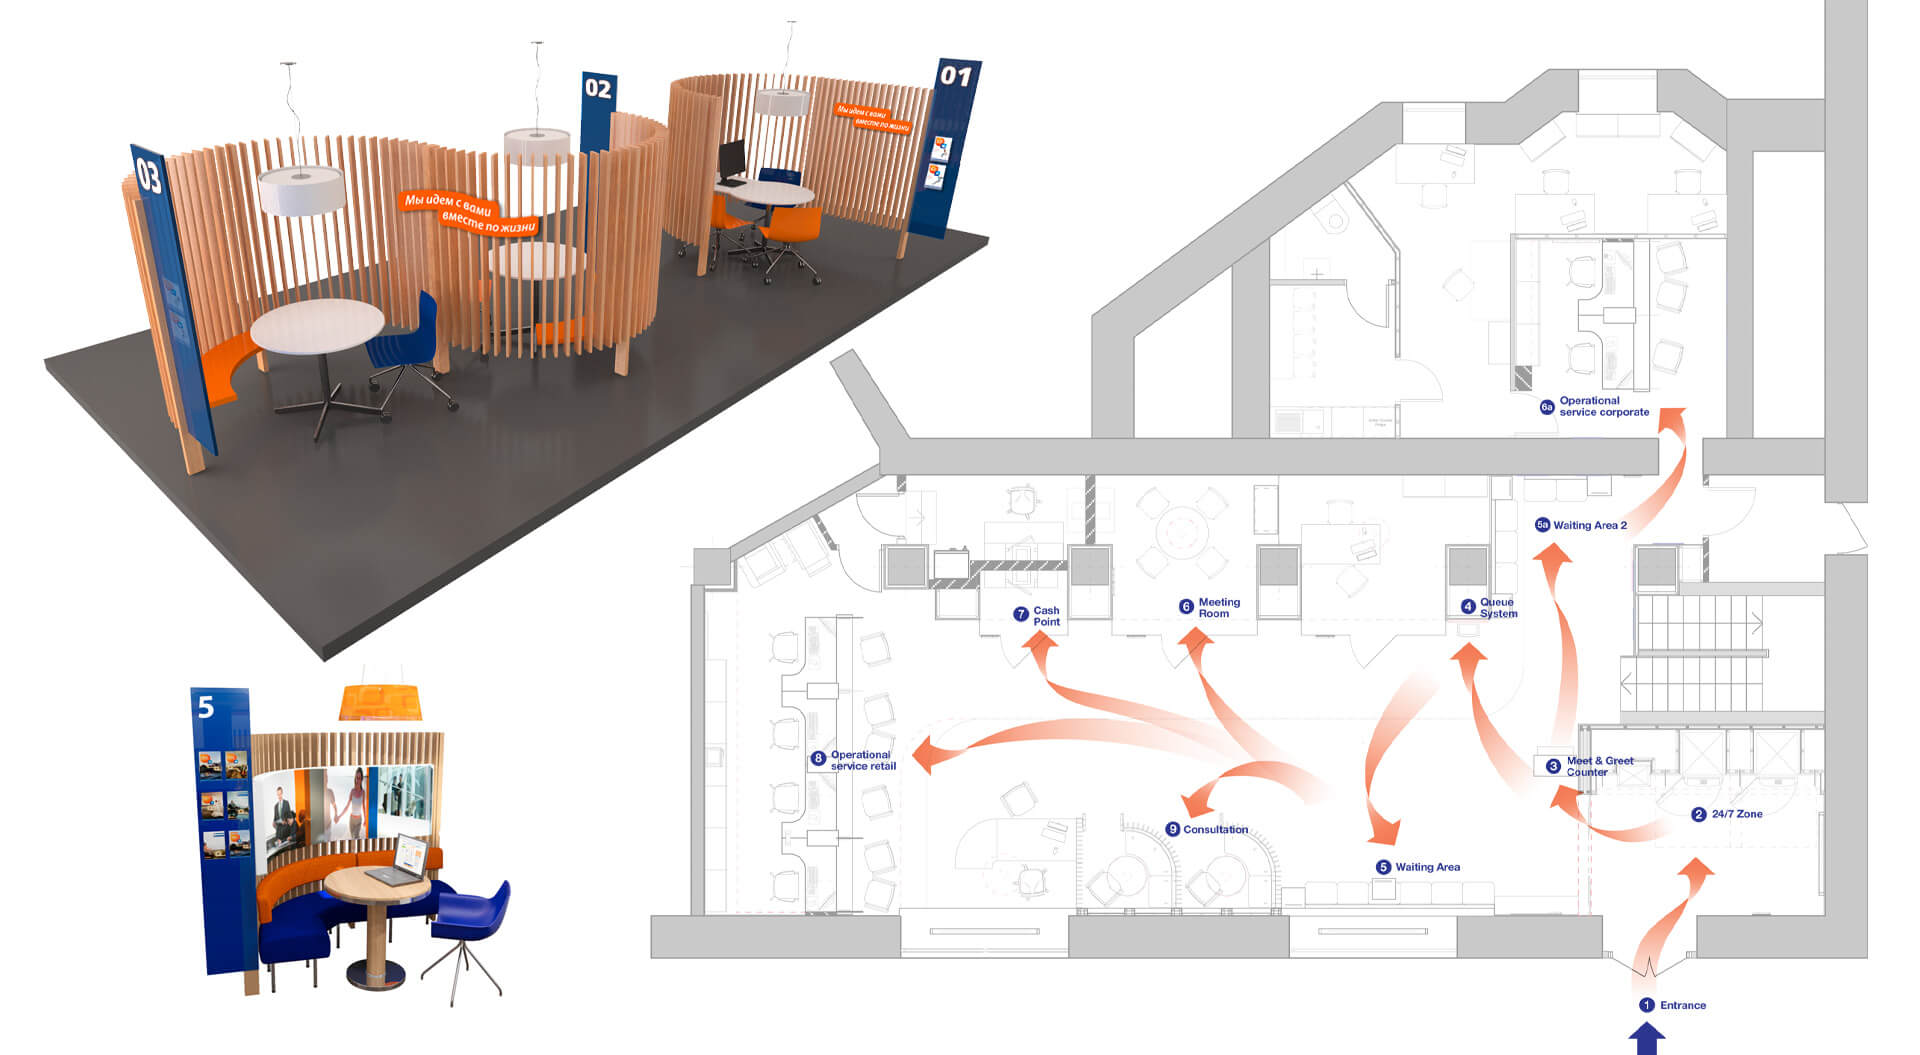 Promsvyazbank floor plans and visual of customer consultation points